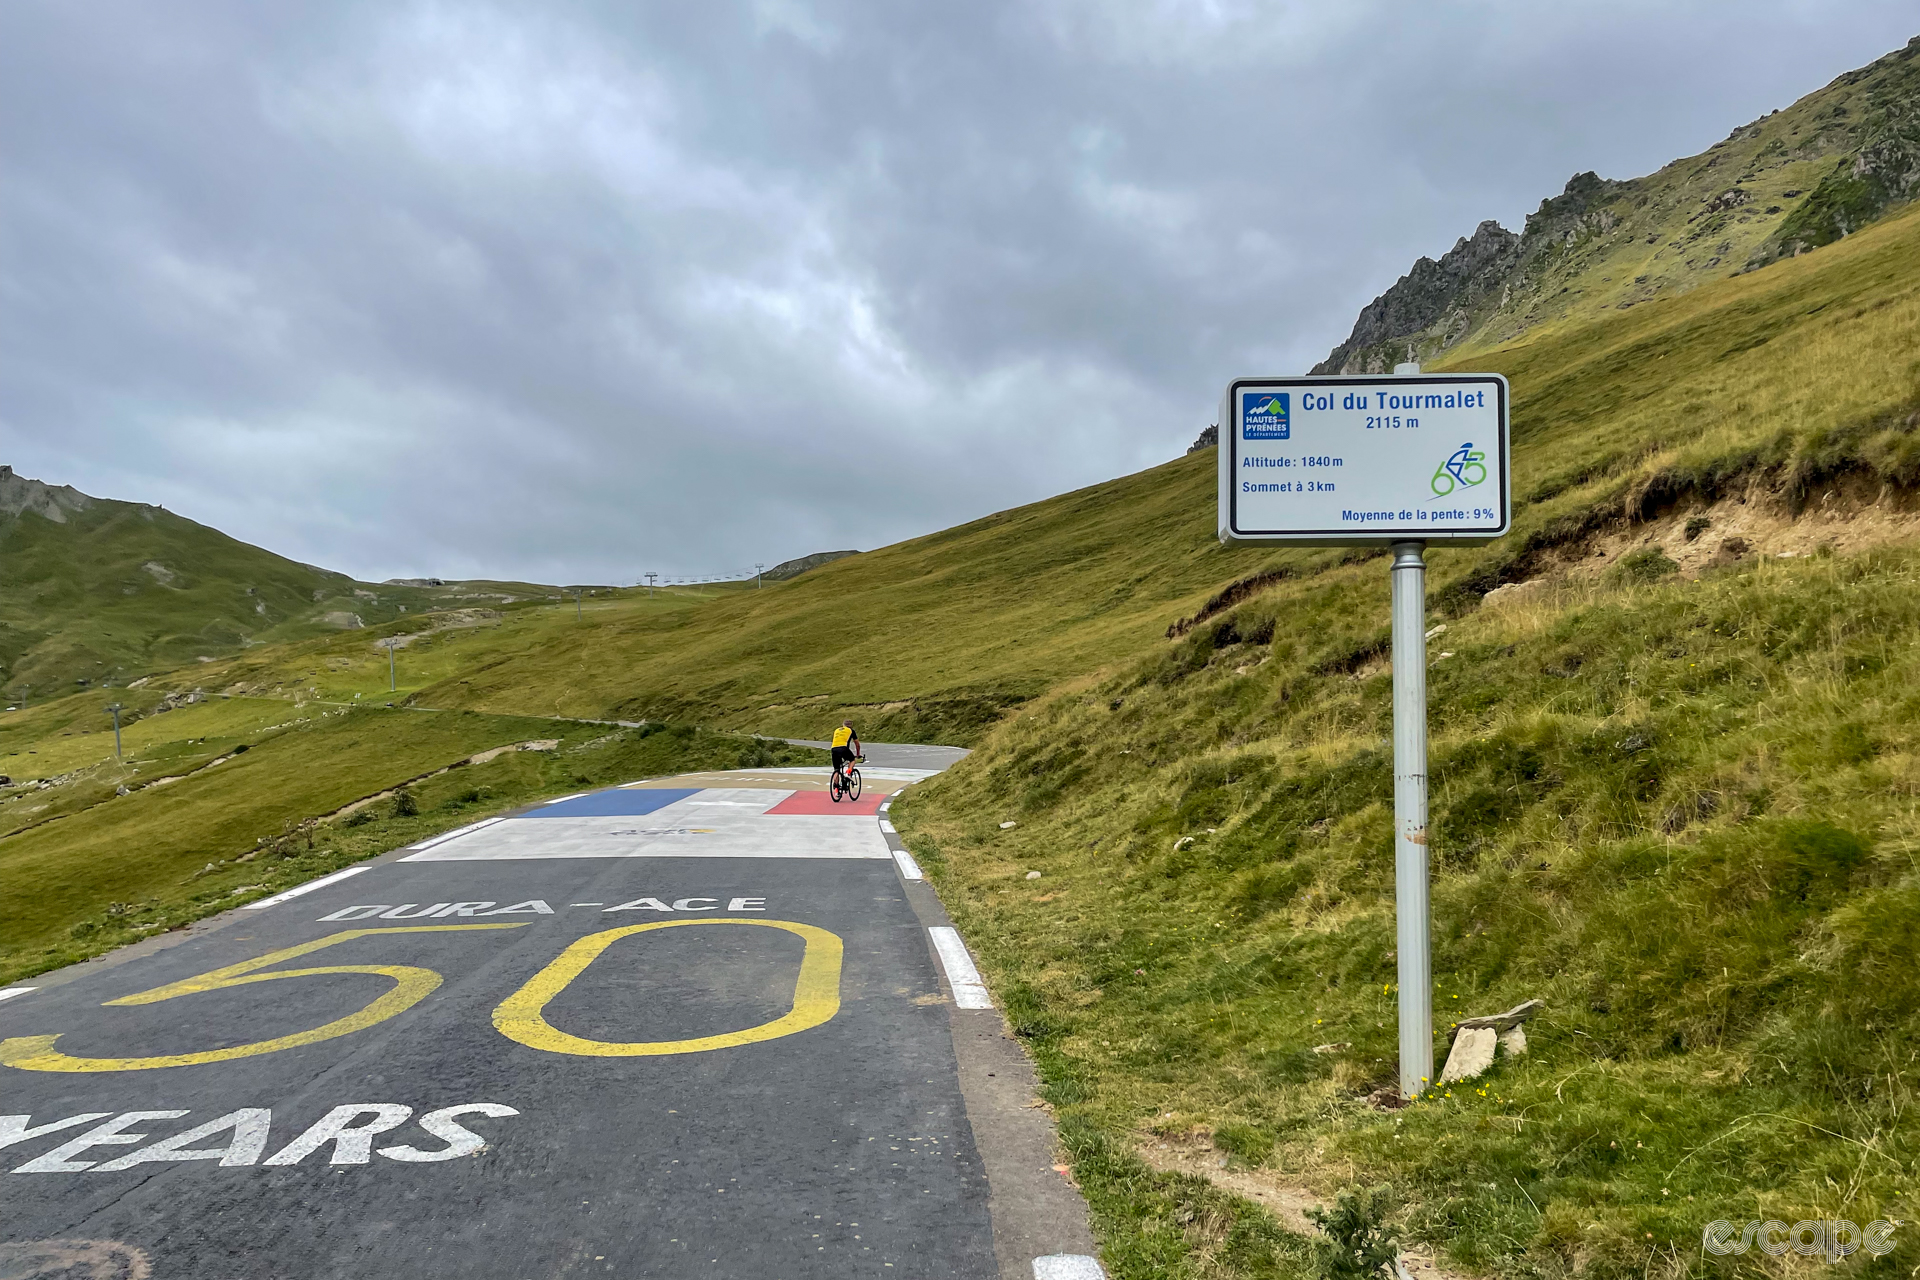 High on the Col du Tourmalet, there's a sign announcing the peak and summit (2,115 meters) and current altitude (1,849 meters) with 3 km to go to the summit, at a 9 percent gradient. The road is painted with the colors of the French flag and a corporate marketing message for the 50th anniversary of Shimano's Dura-Ace components.